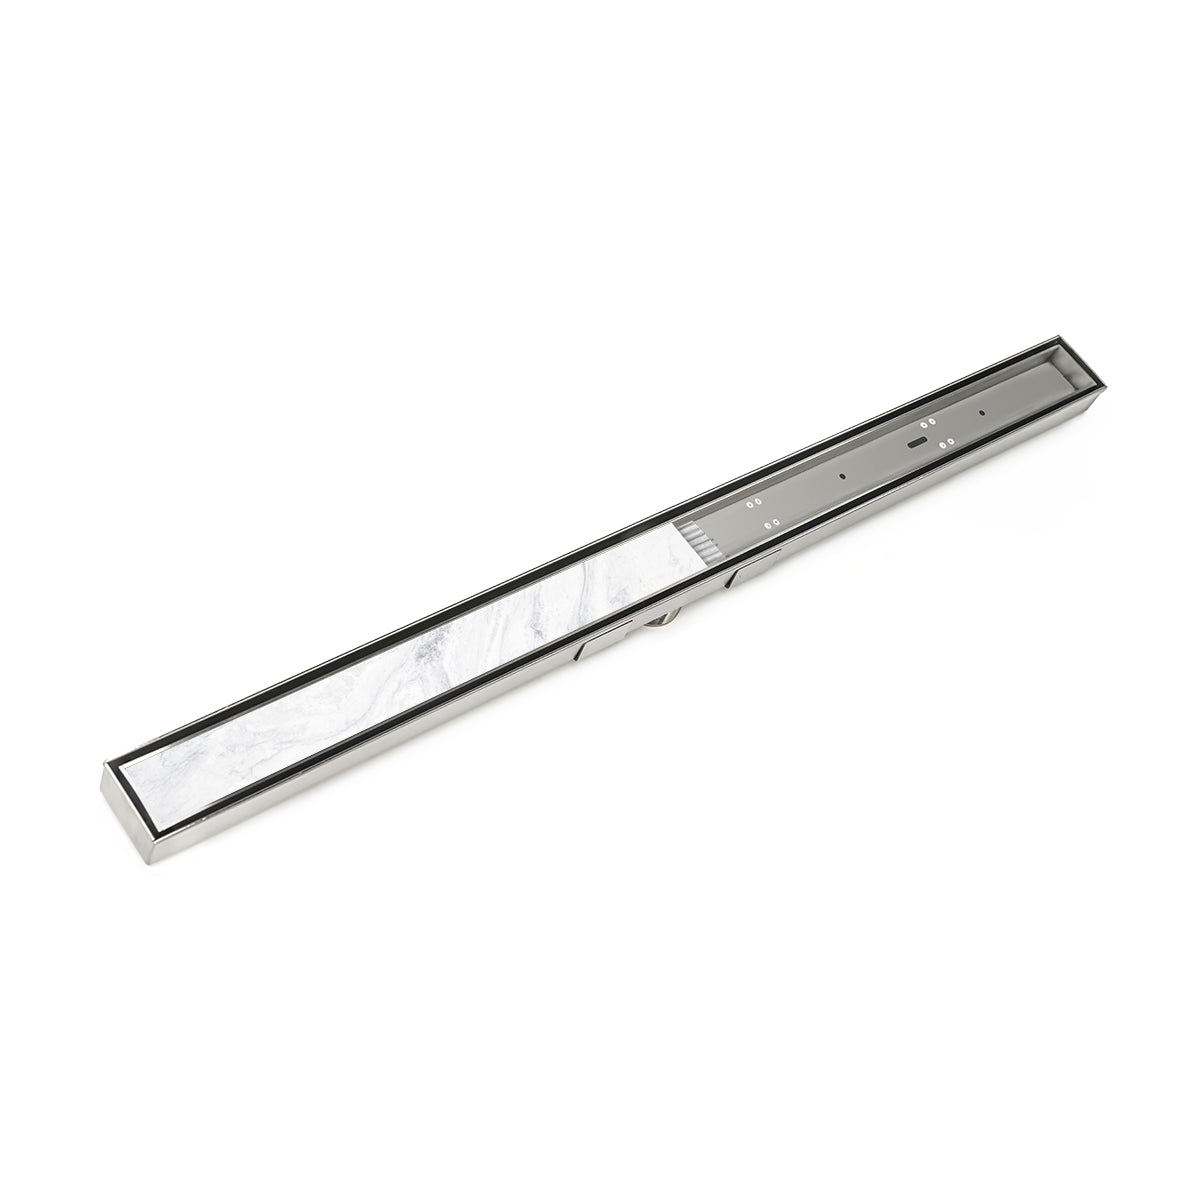 Infinity Drain 96" S-Stainless Steel Series High Flow Site Sizable Linear Drain Kit with Low Profile Tile Insert Frame with PVC Drain Body, 3" Outlet